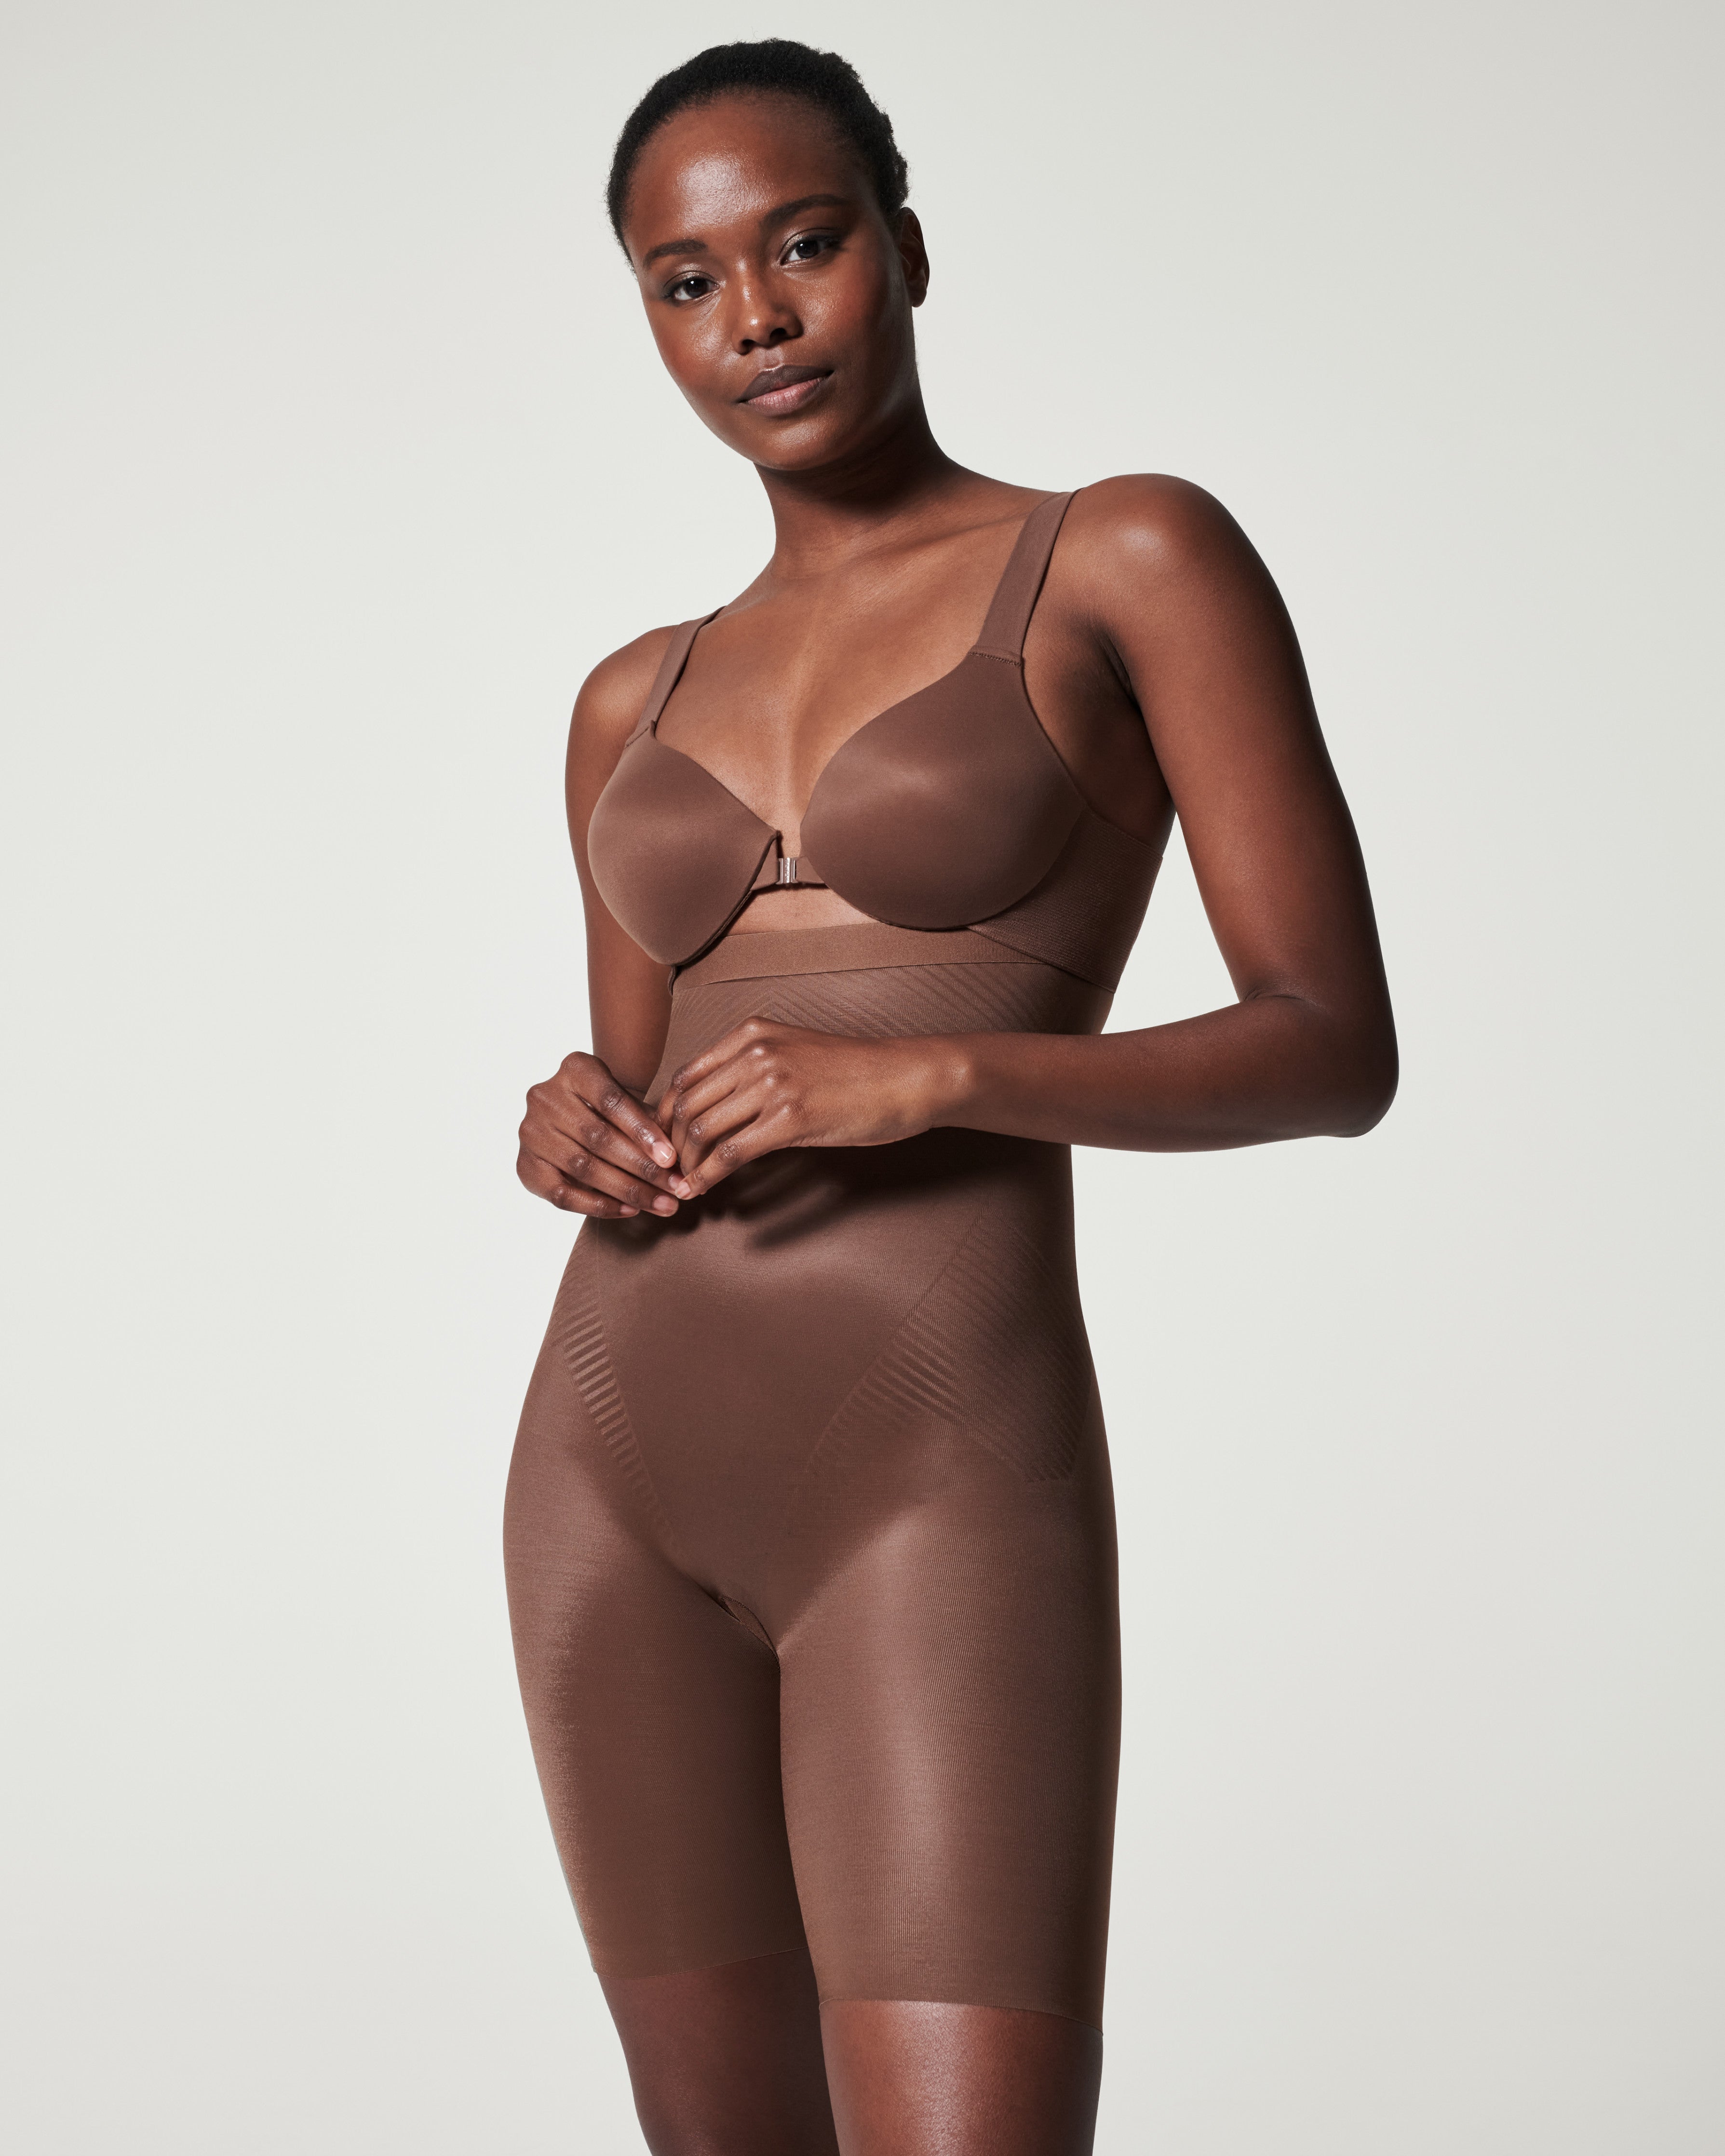 Invisible Shaping High-Waisted Mid-Thigh Short